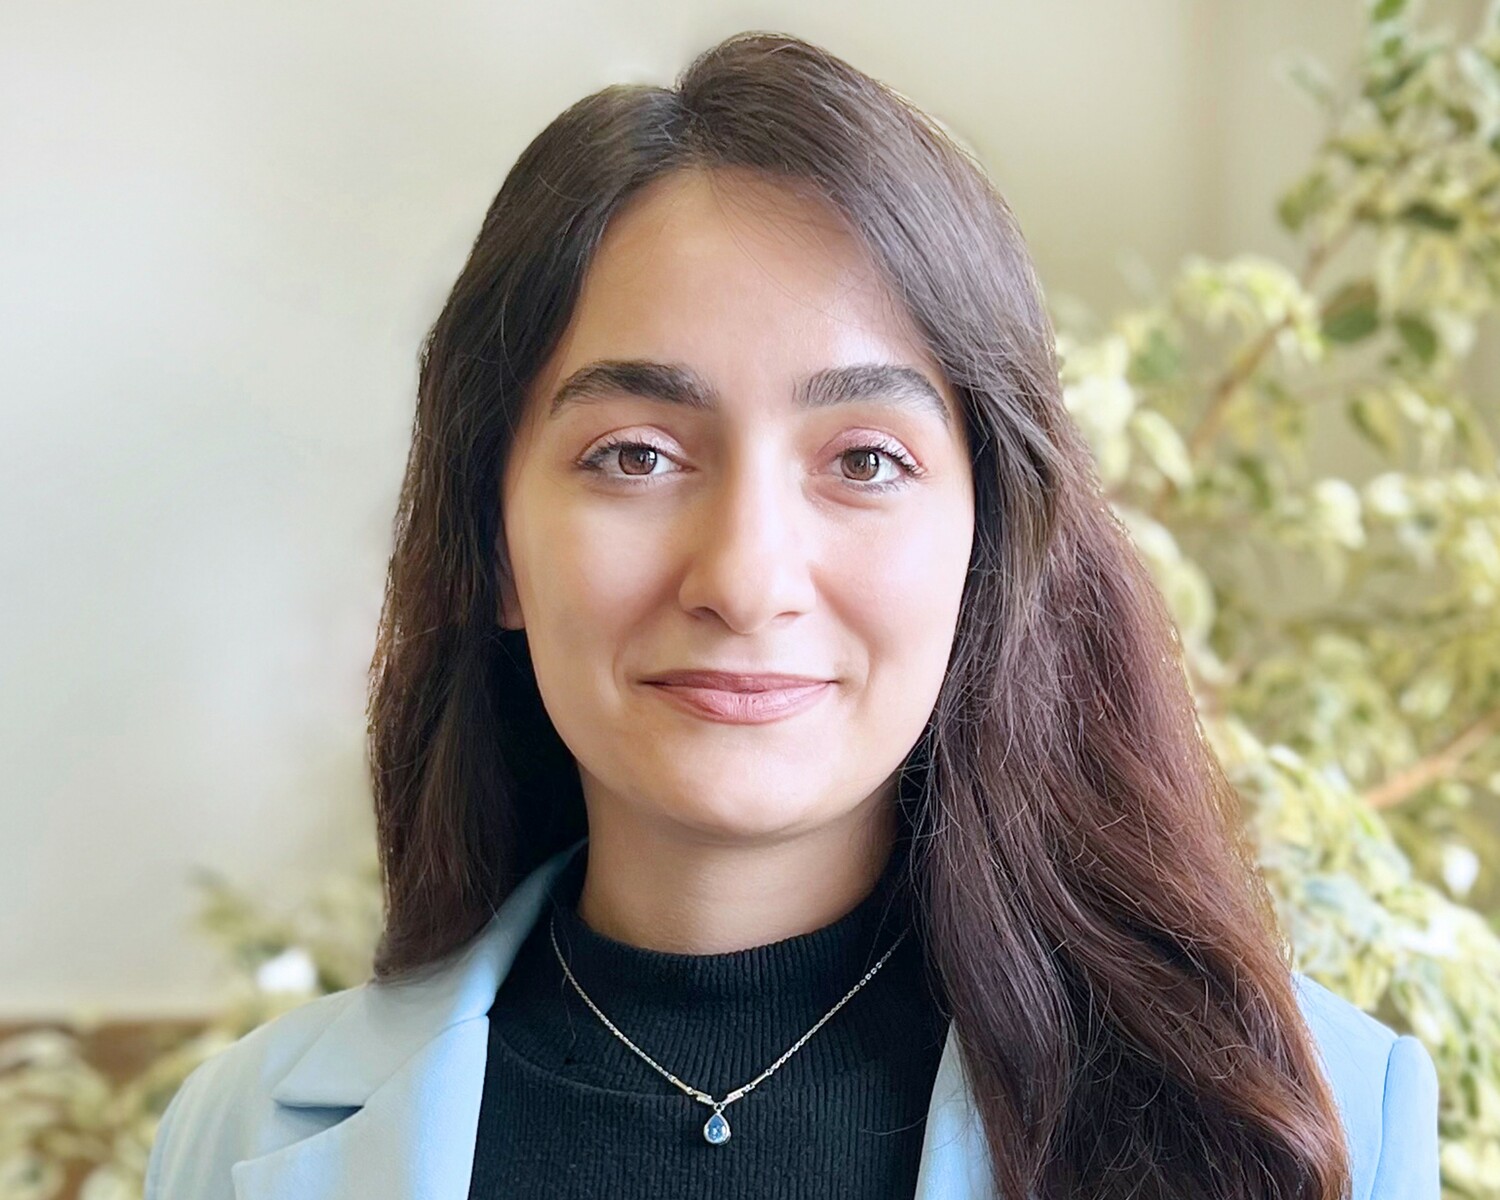 Nigar Aliyeva, seasoned legal expert with over 5 years' experience in insurance, IP, banking, IT, education, tourism law. Specializes in organizational-legal changes, licenses, securities, high-value contracts. Adept in project involvement, compliance, management. Fluent in English, Azerbaijani, Turkish.